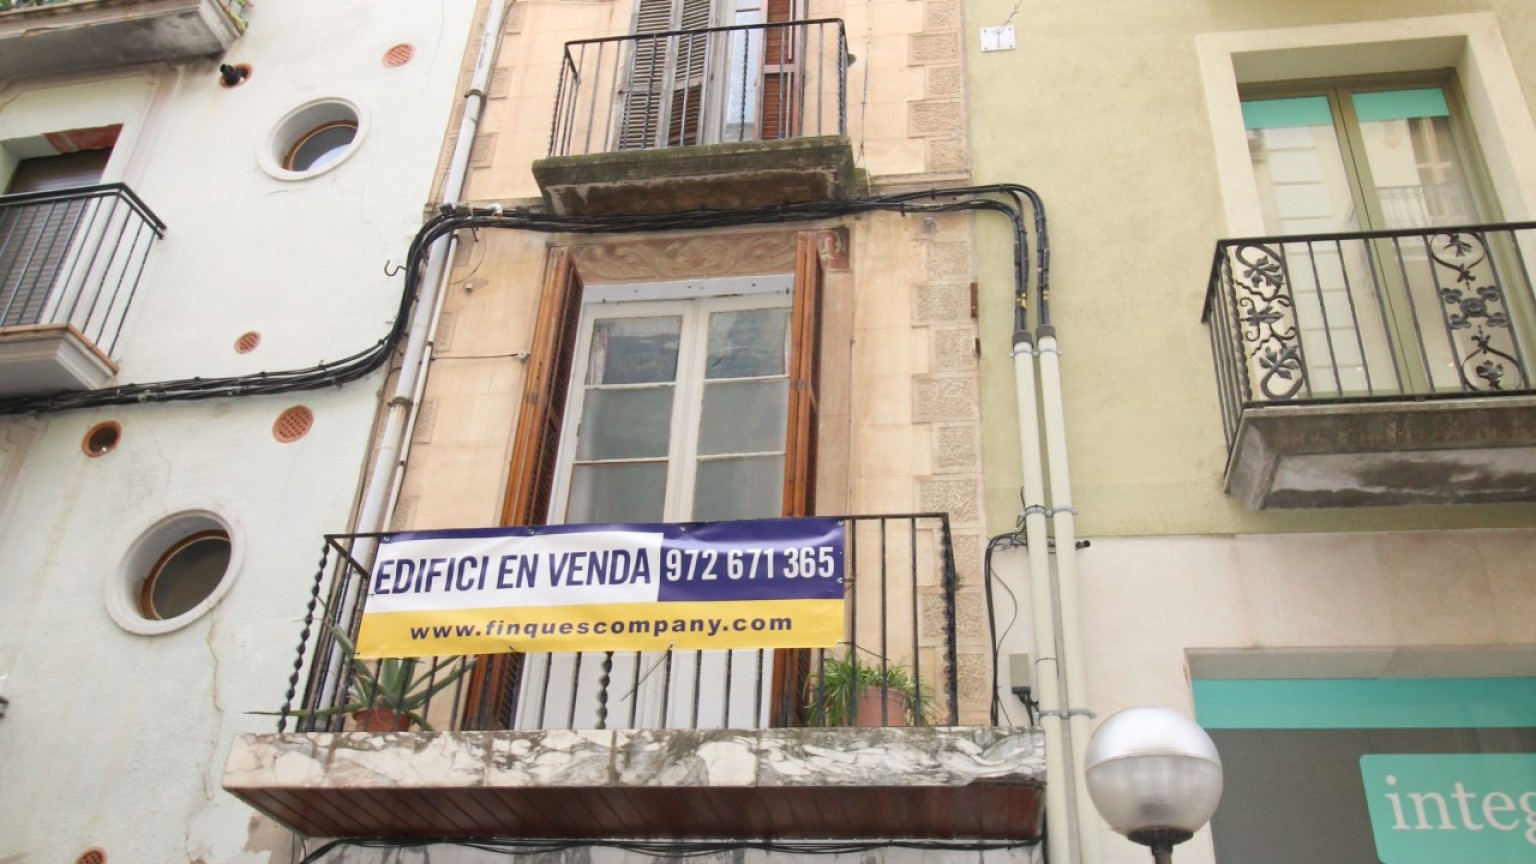 Building for sale, ground floor and three floors in the centre of Figueres.